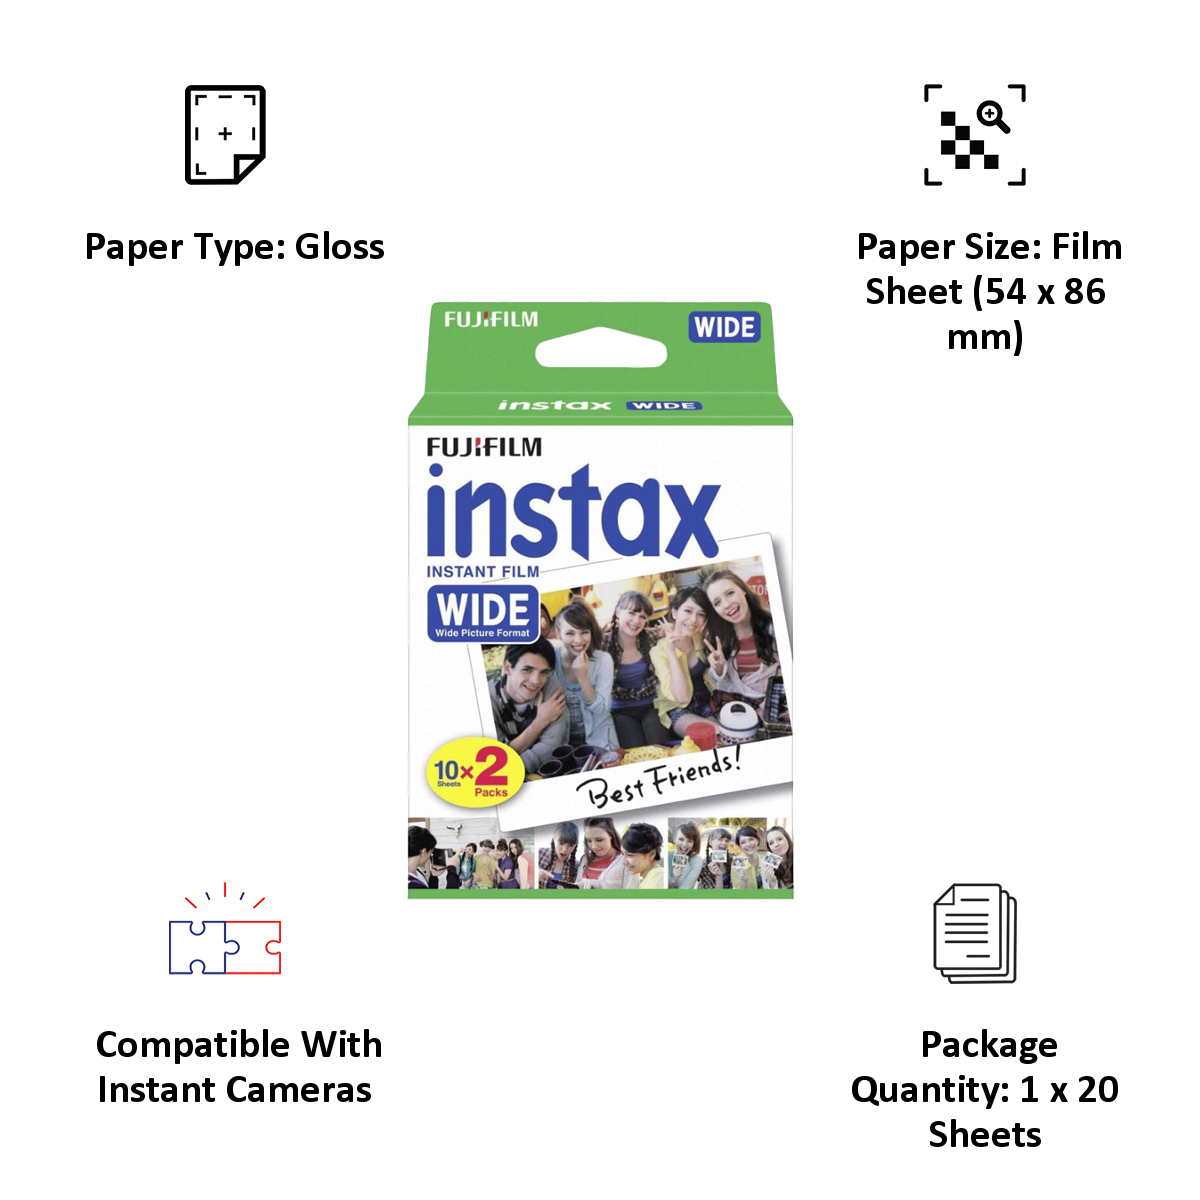 Instax wide film - 20 sheets per pack